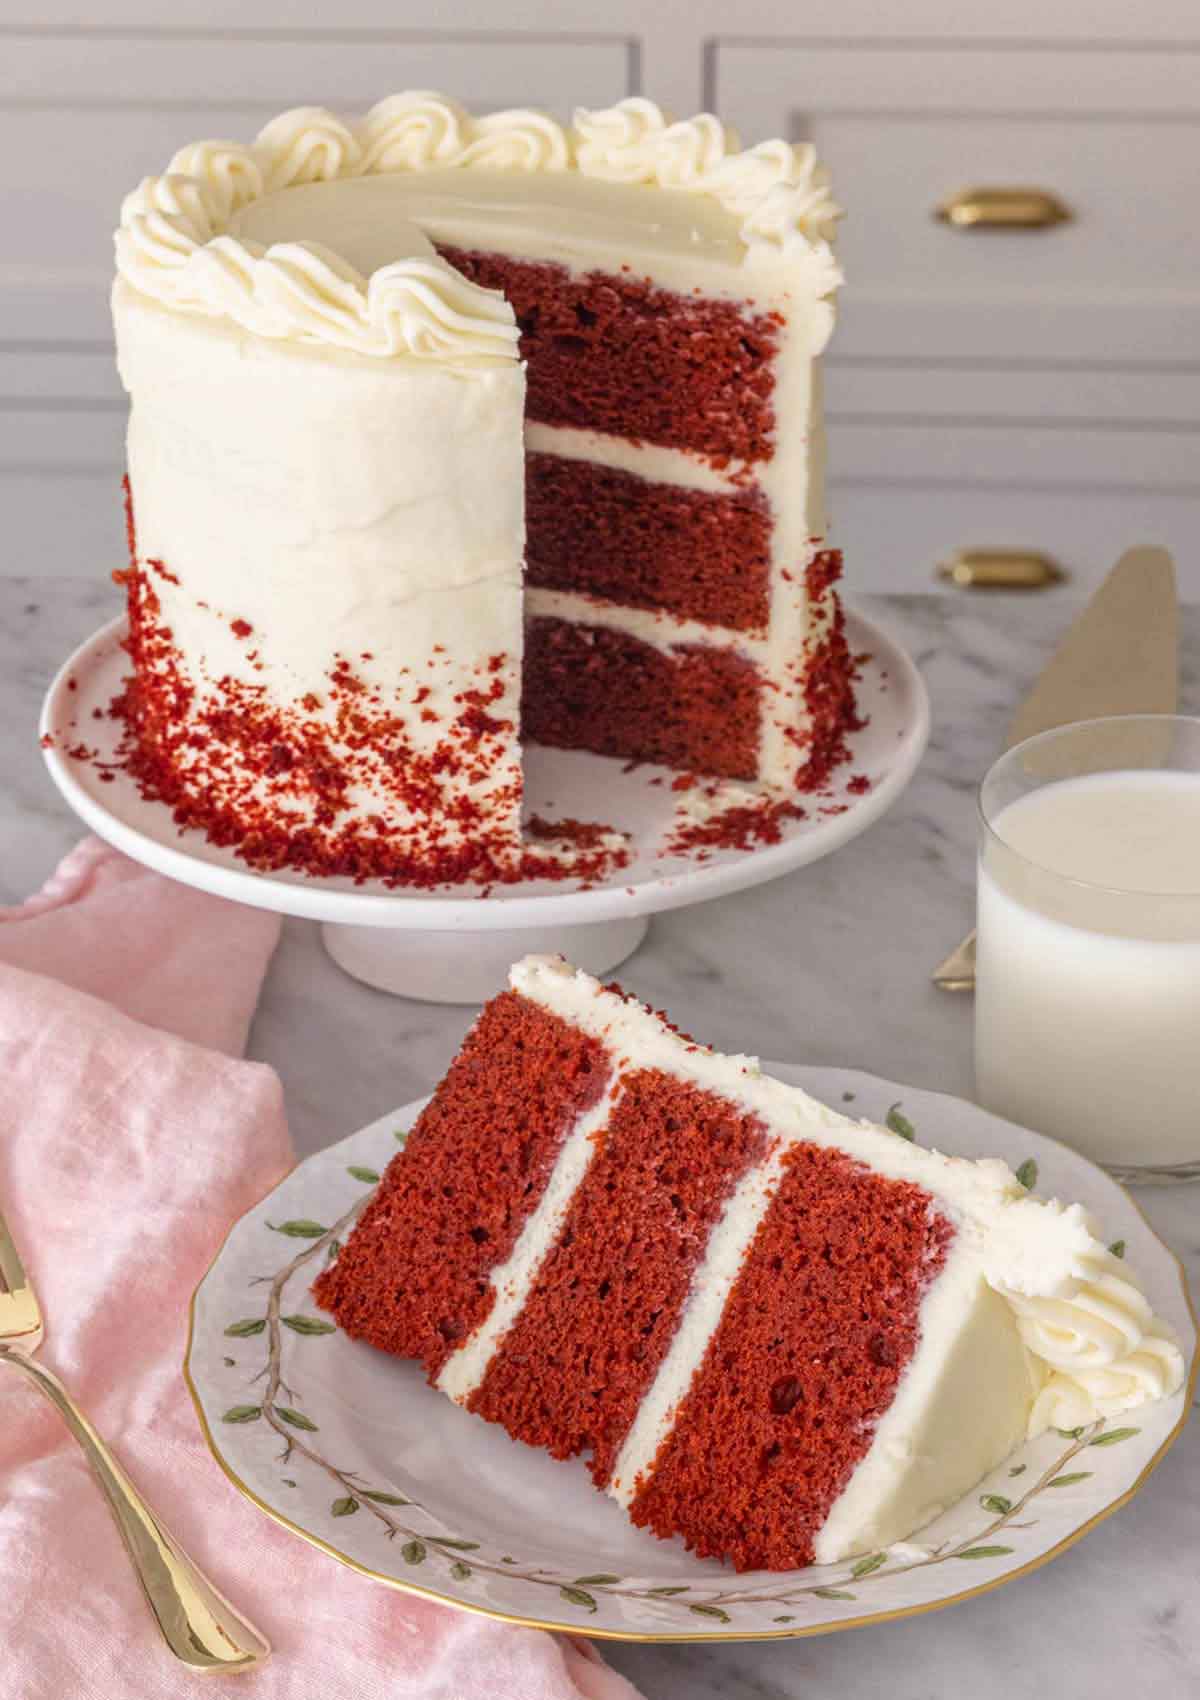 I. Introduction to Red Velvet Cakes